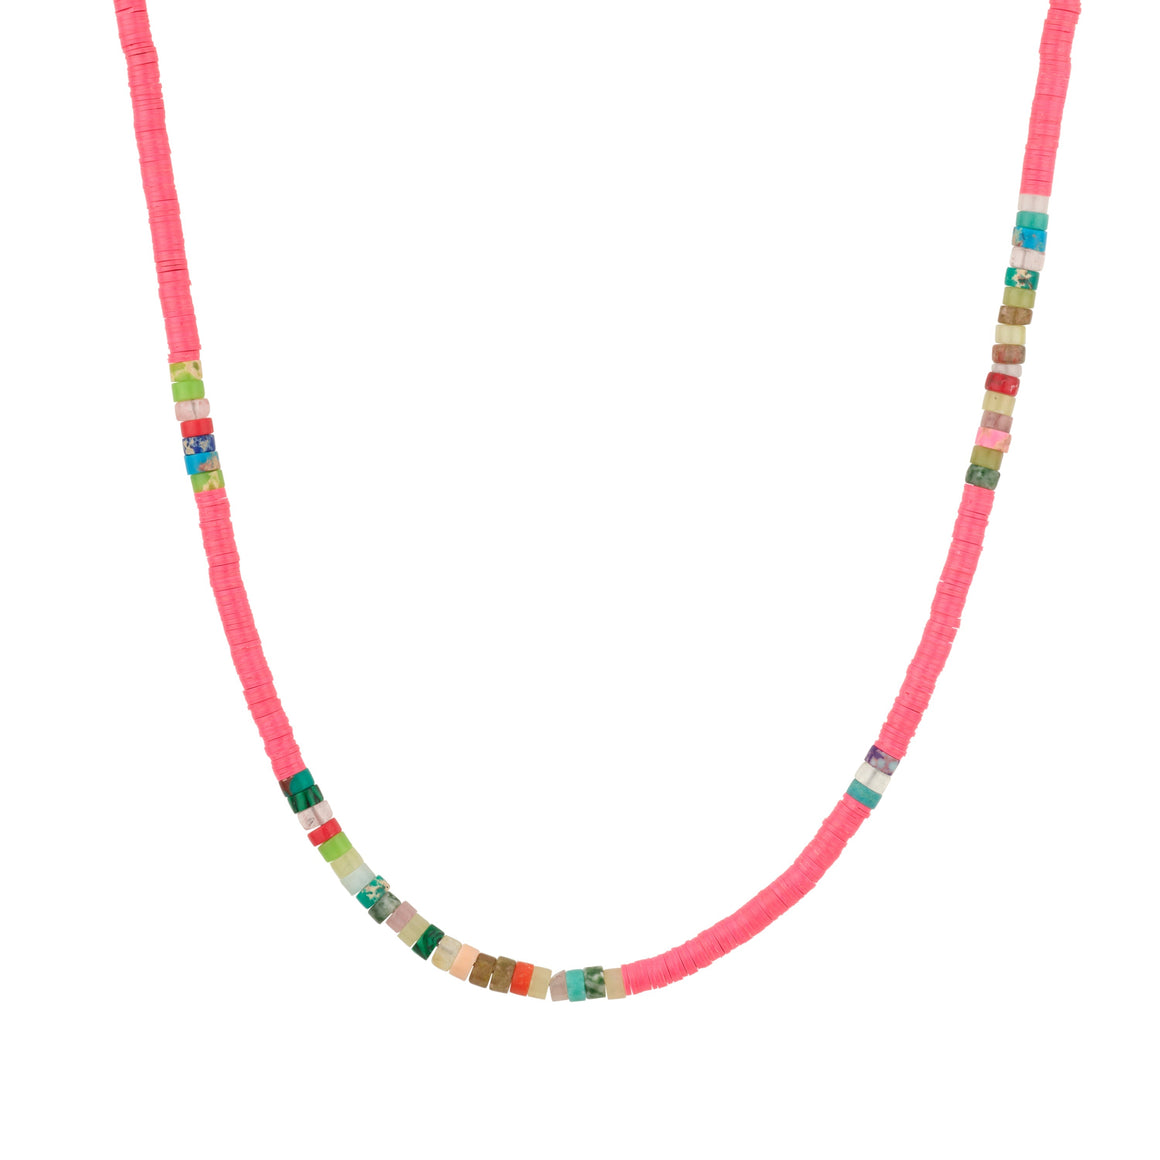 Pa'ani Necklace in White